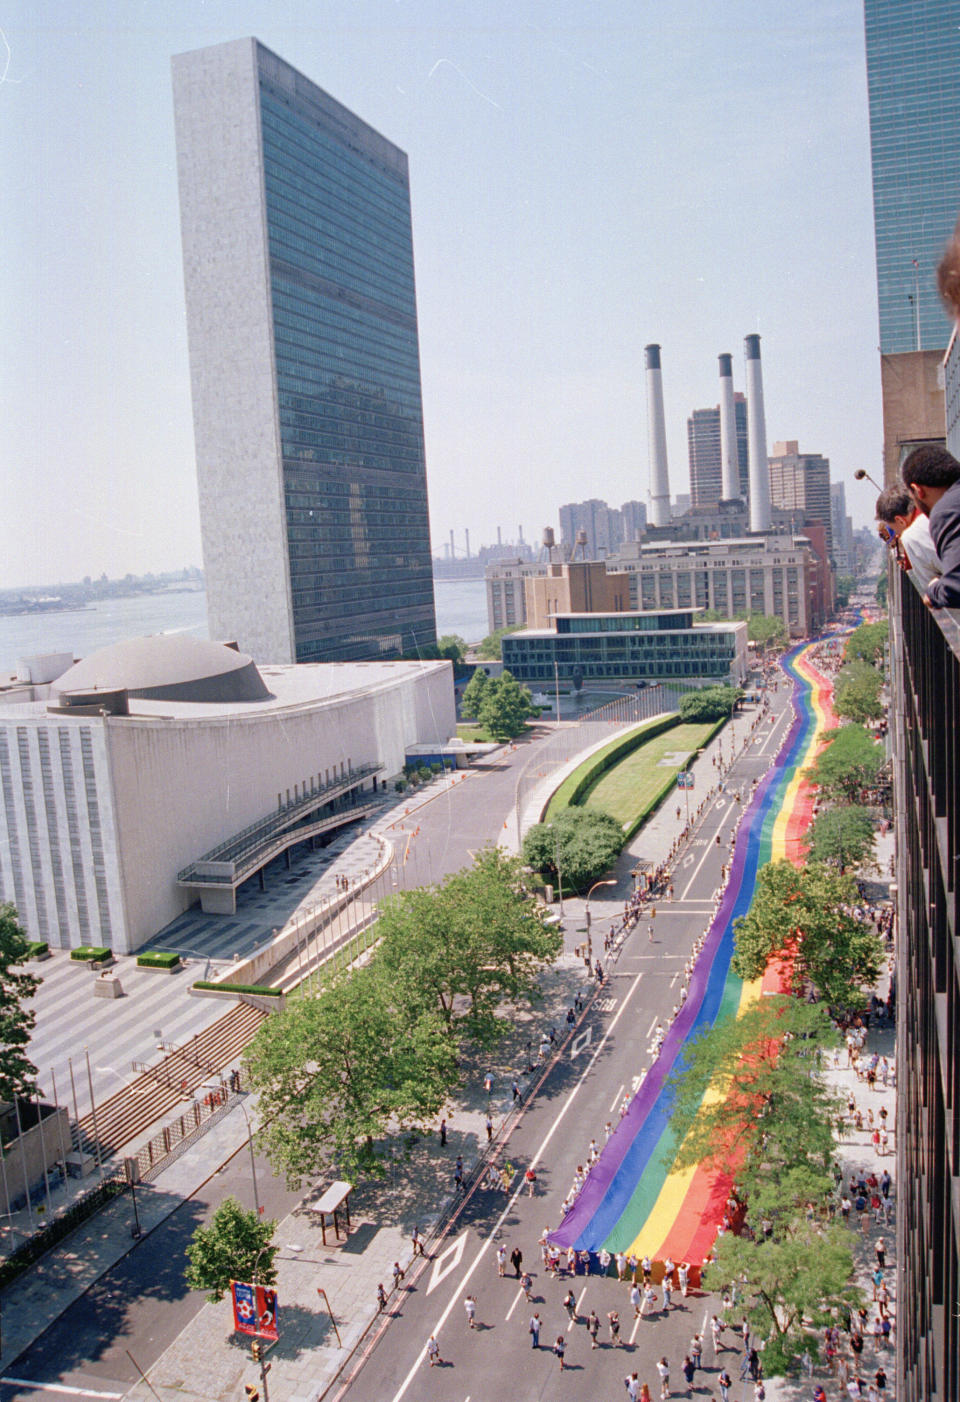 FILE- In this June 26, 1994 file photo, marchers carrying a mile-long rainbow banner up First Avenue past the United Nations in New York City during the Stonewall 25 parade, marking the 25th anniversary of the Stonewall uprising. June 2019 Pride Month marks the 50th Anniversary of the Stonewall uprising with events that commemorate that moment and its impact through the last five decades. (AP Photo/Eric Miller, File)